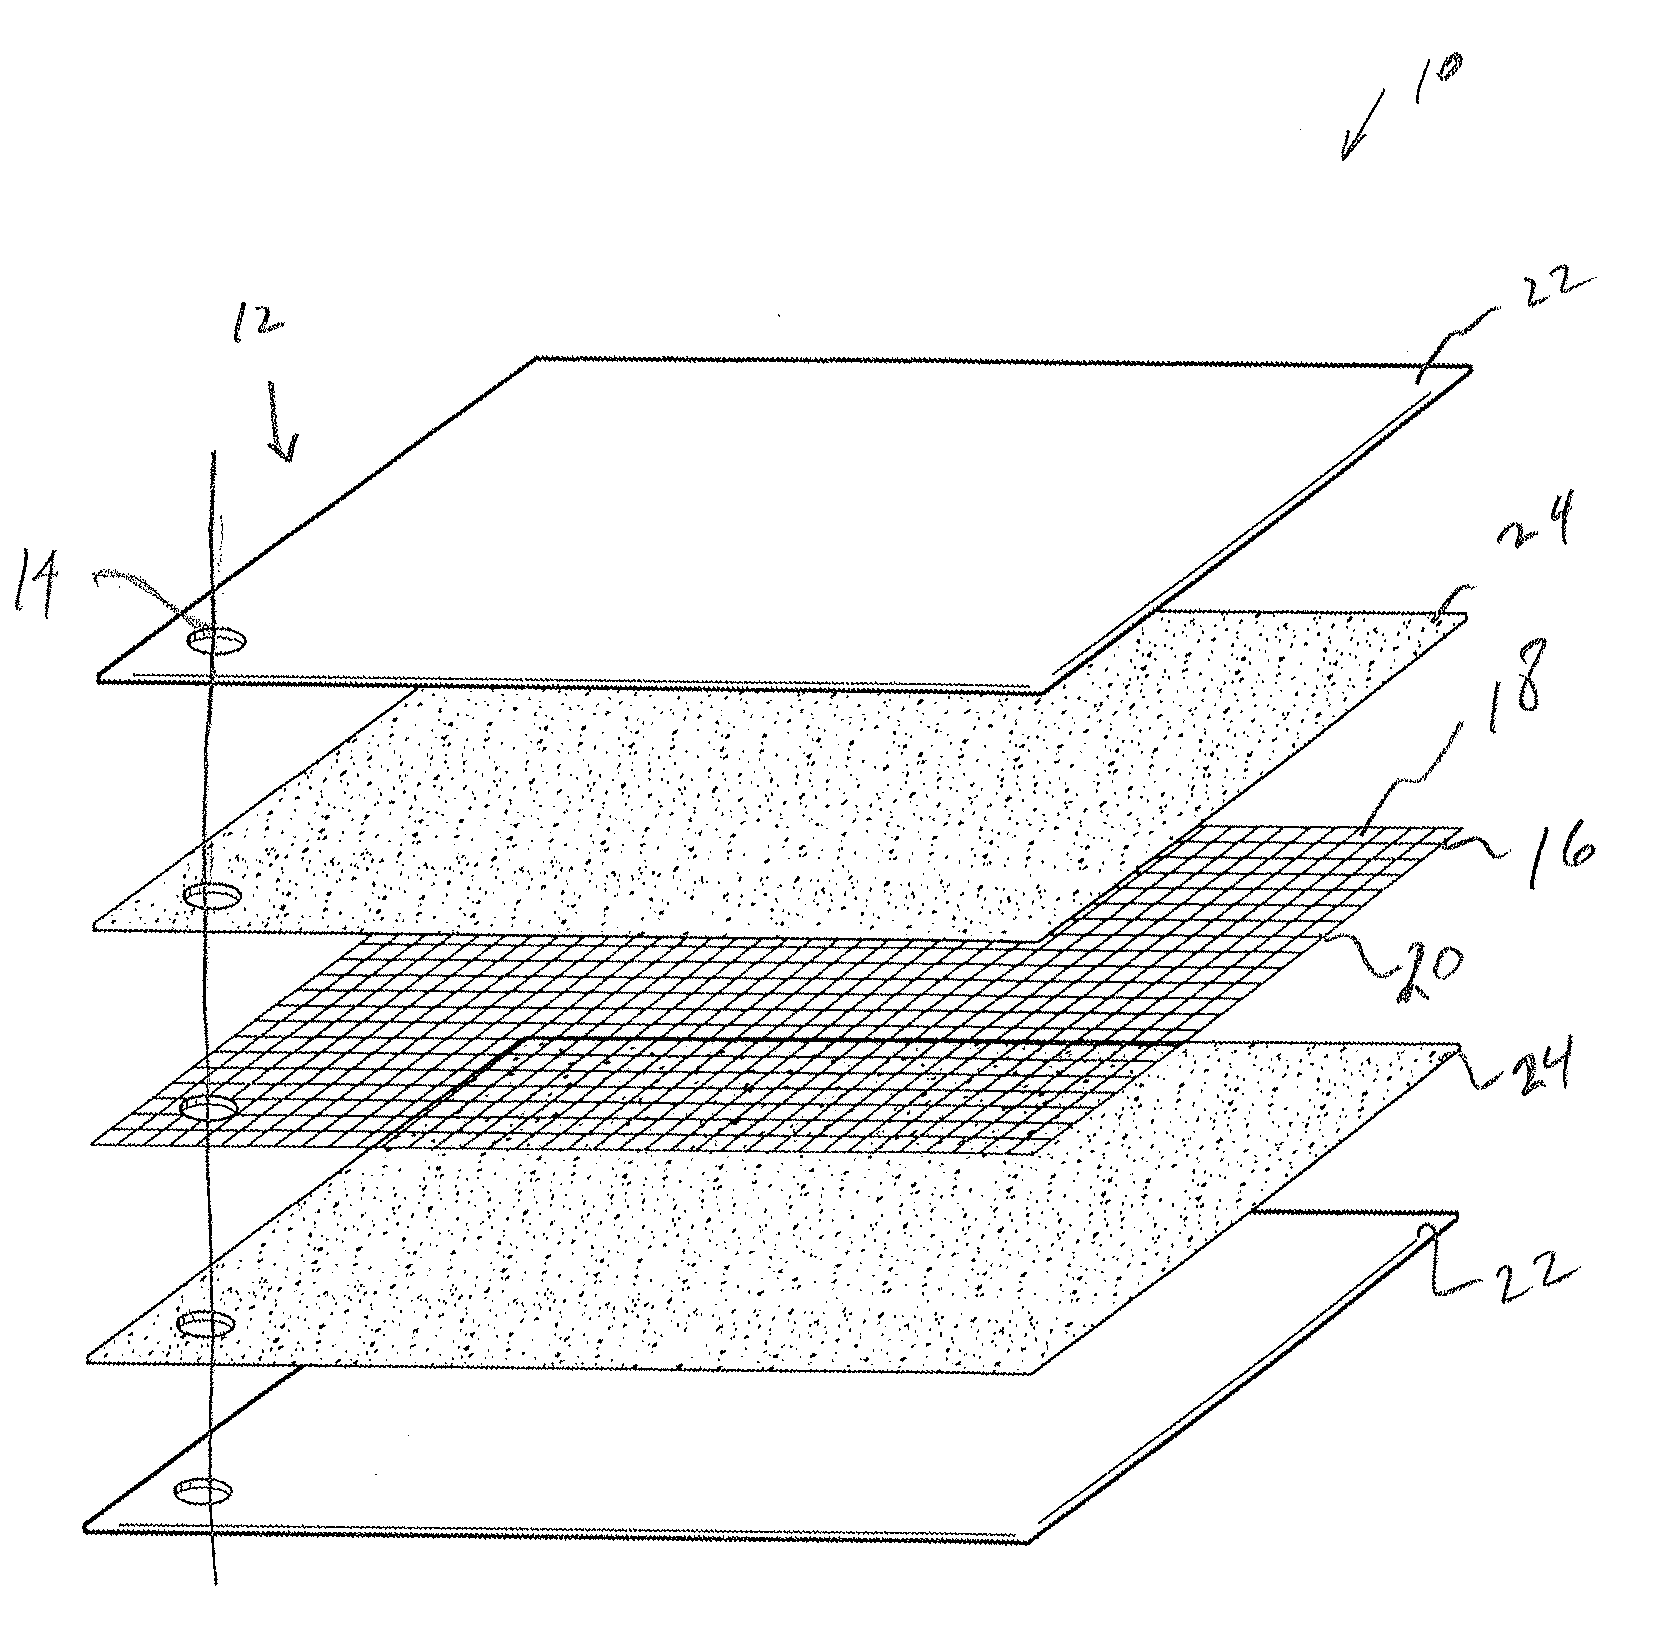 Fuel cell composite flow field element and method of forming the same